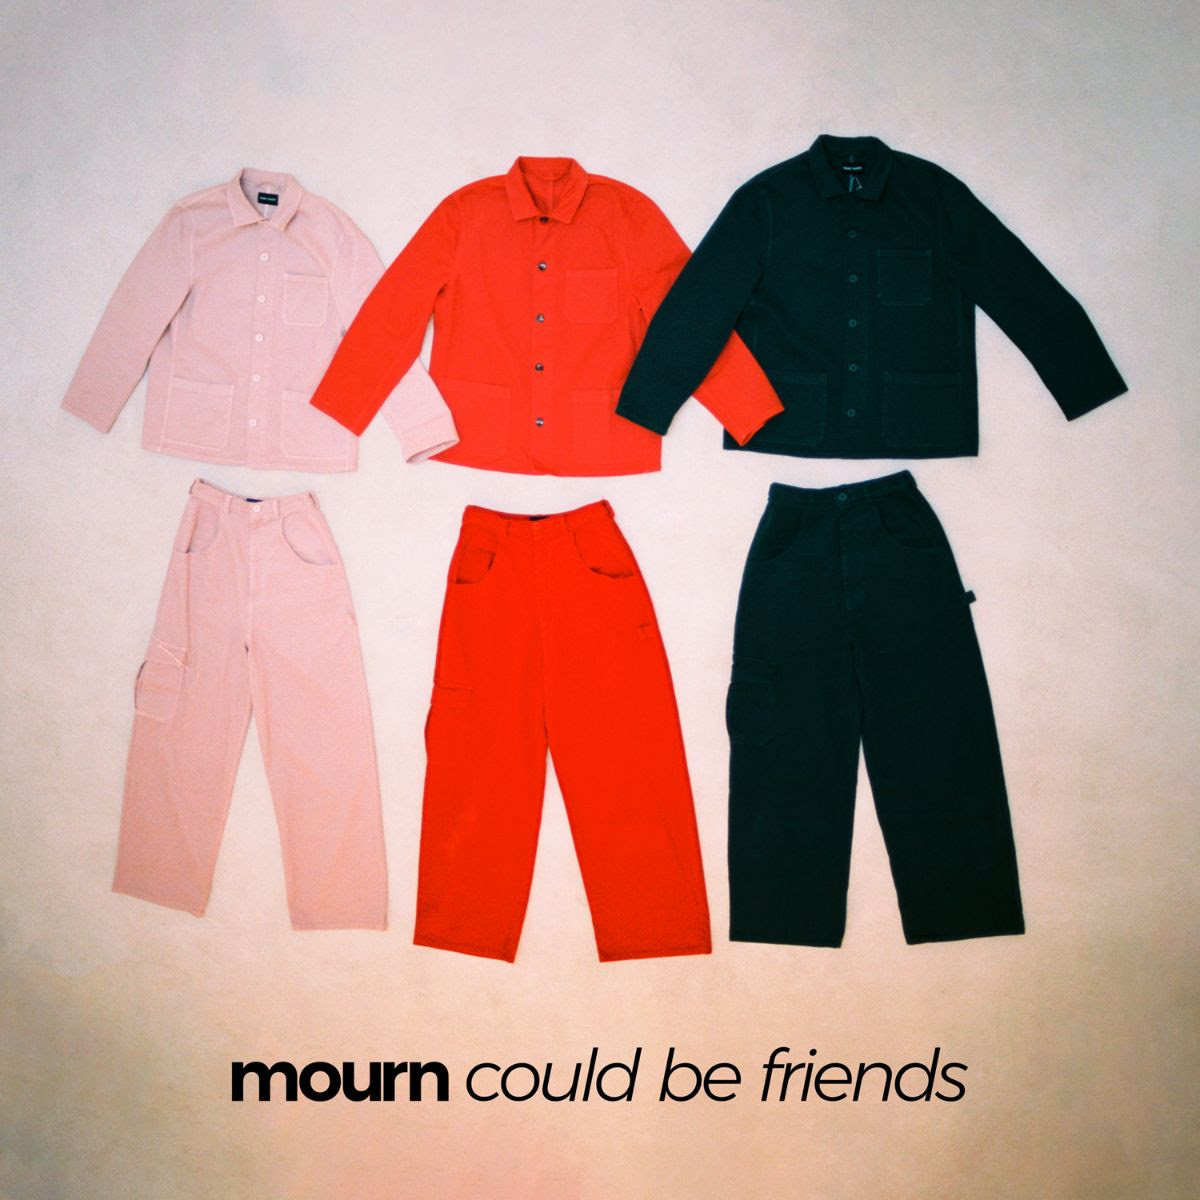 mourn could be friends